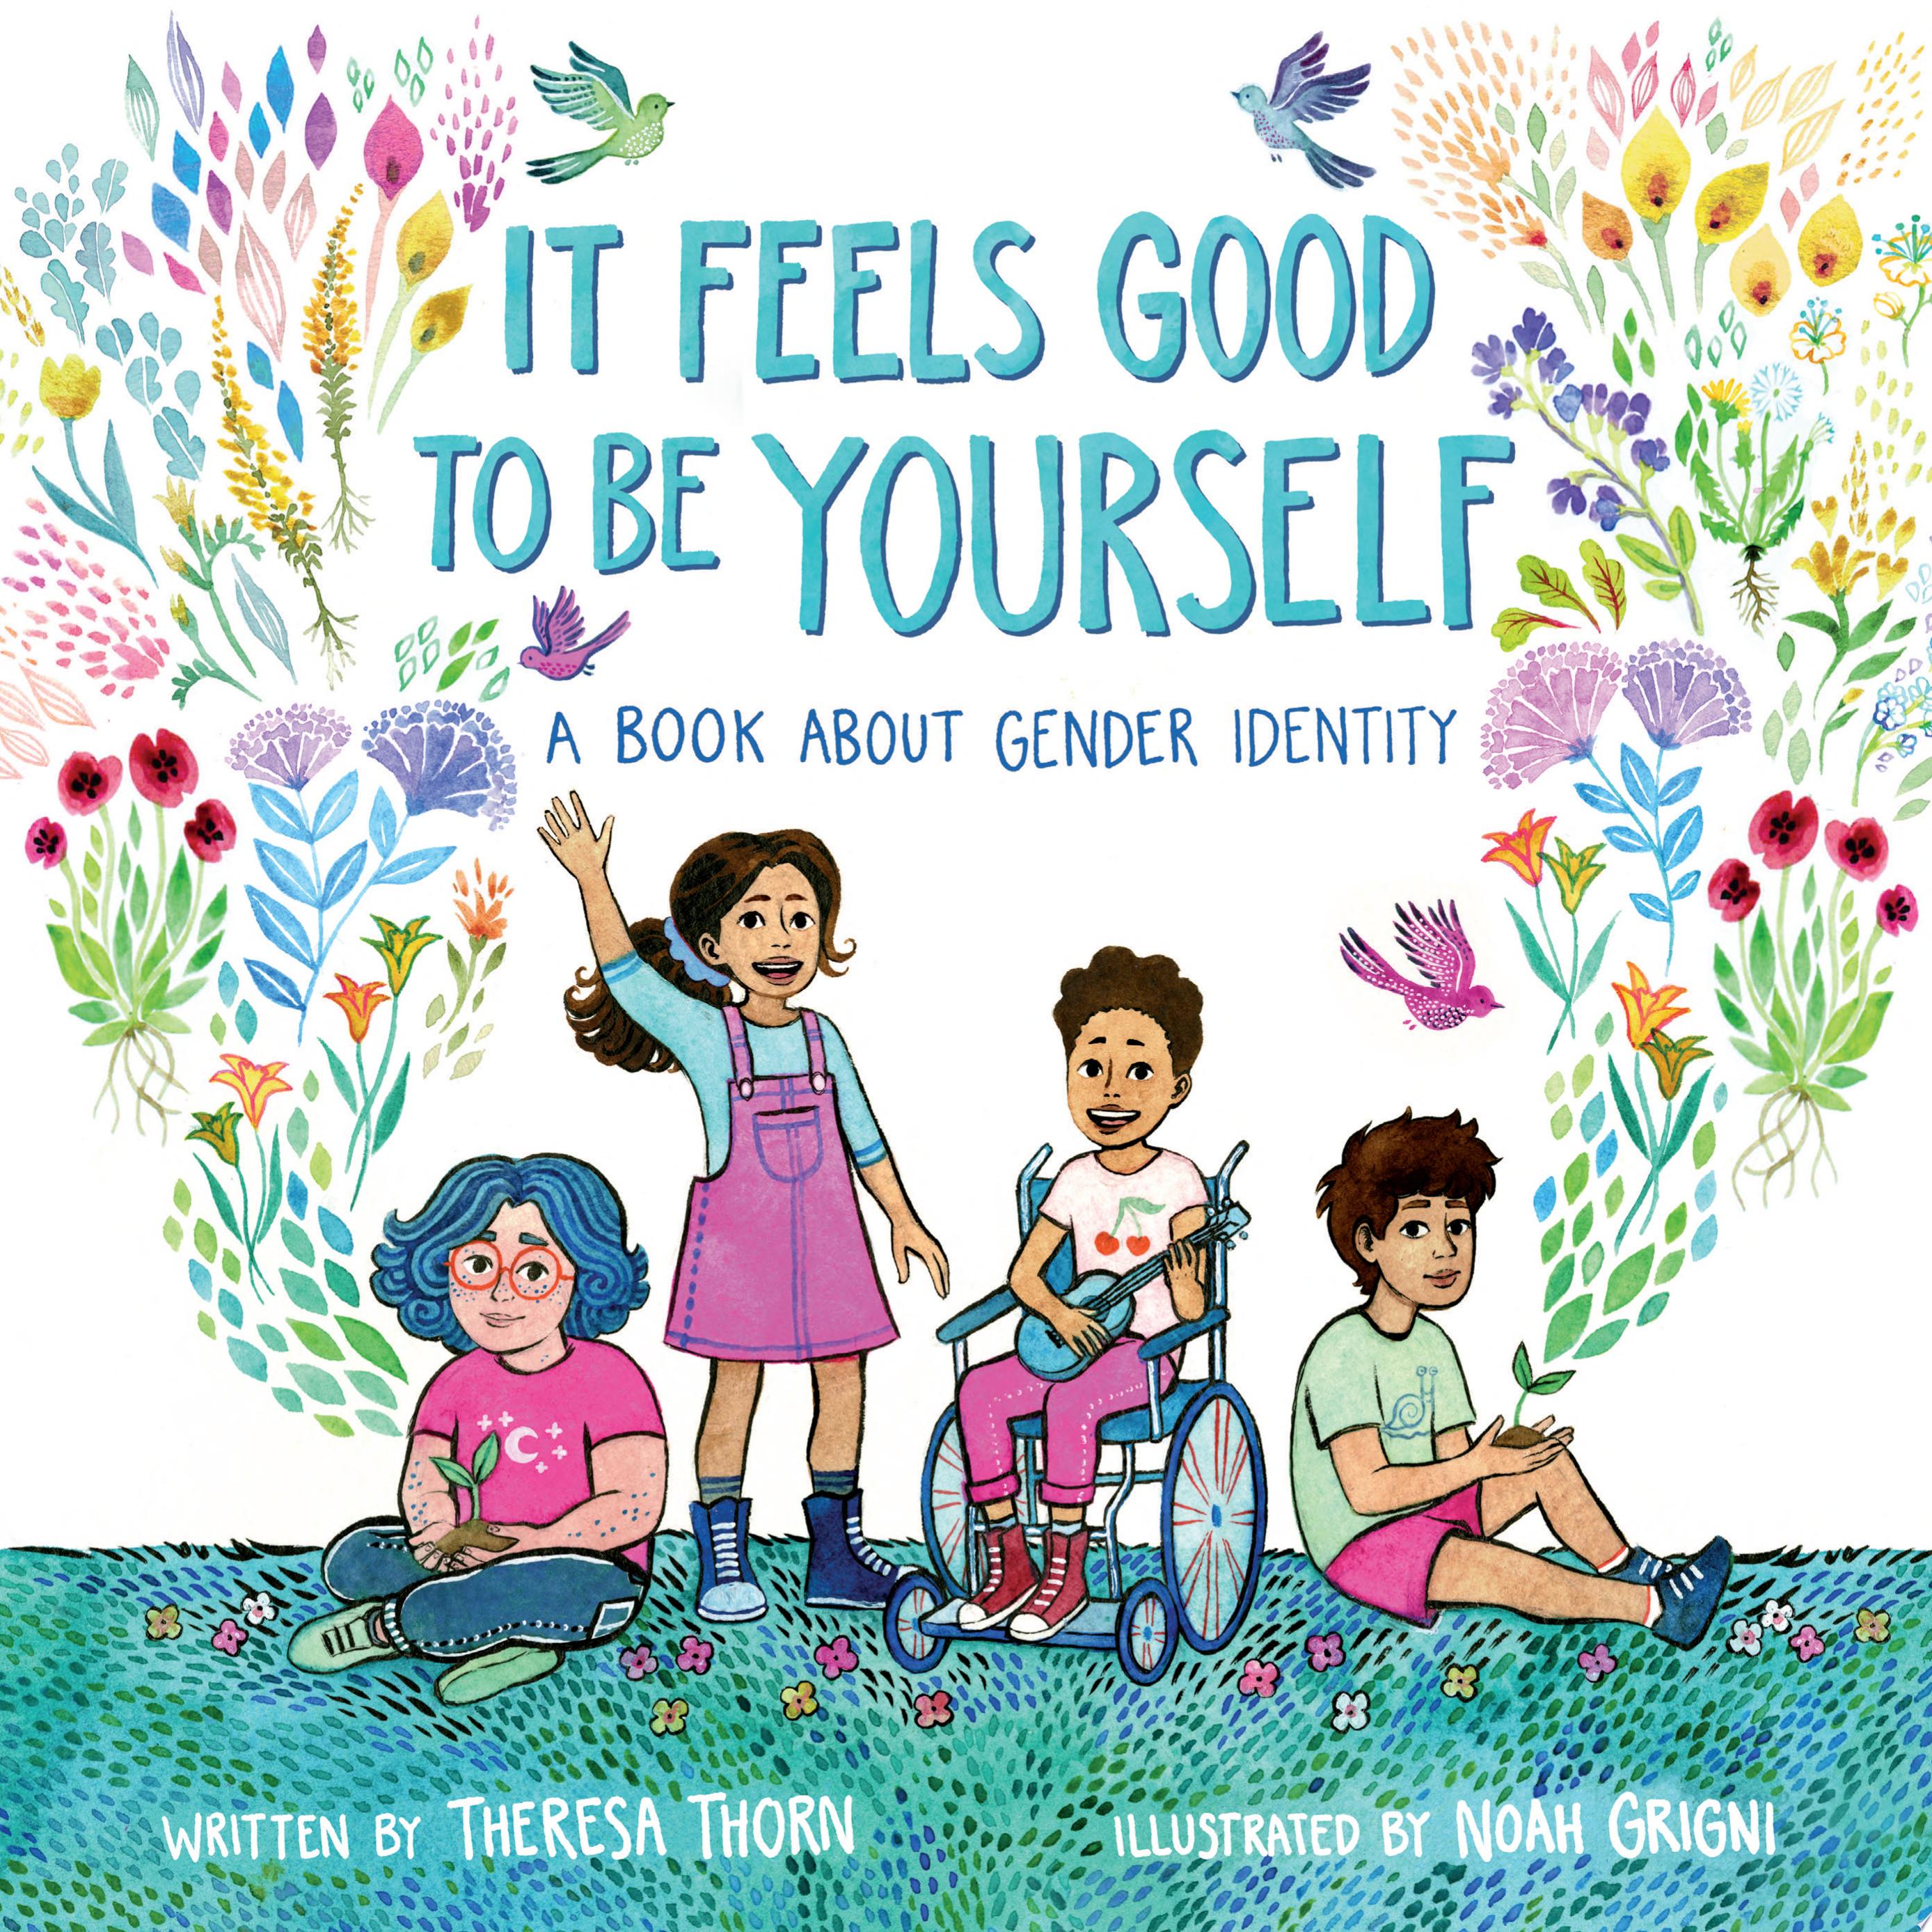 Image for "It Feels Good to Be Yourself: a book about gender identity"